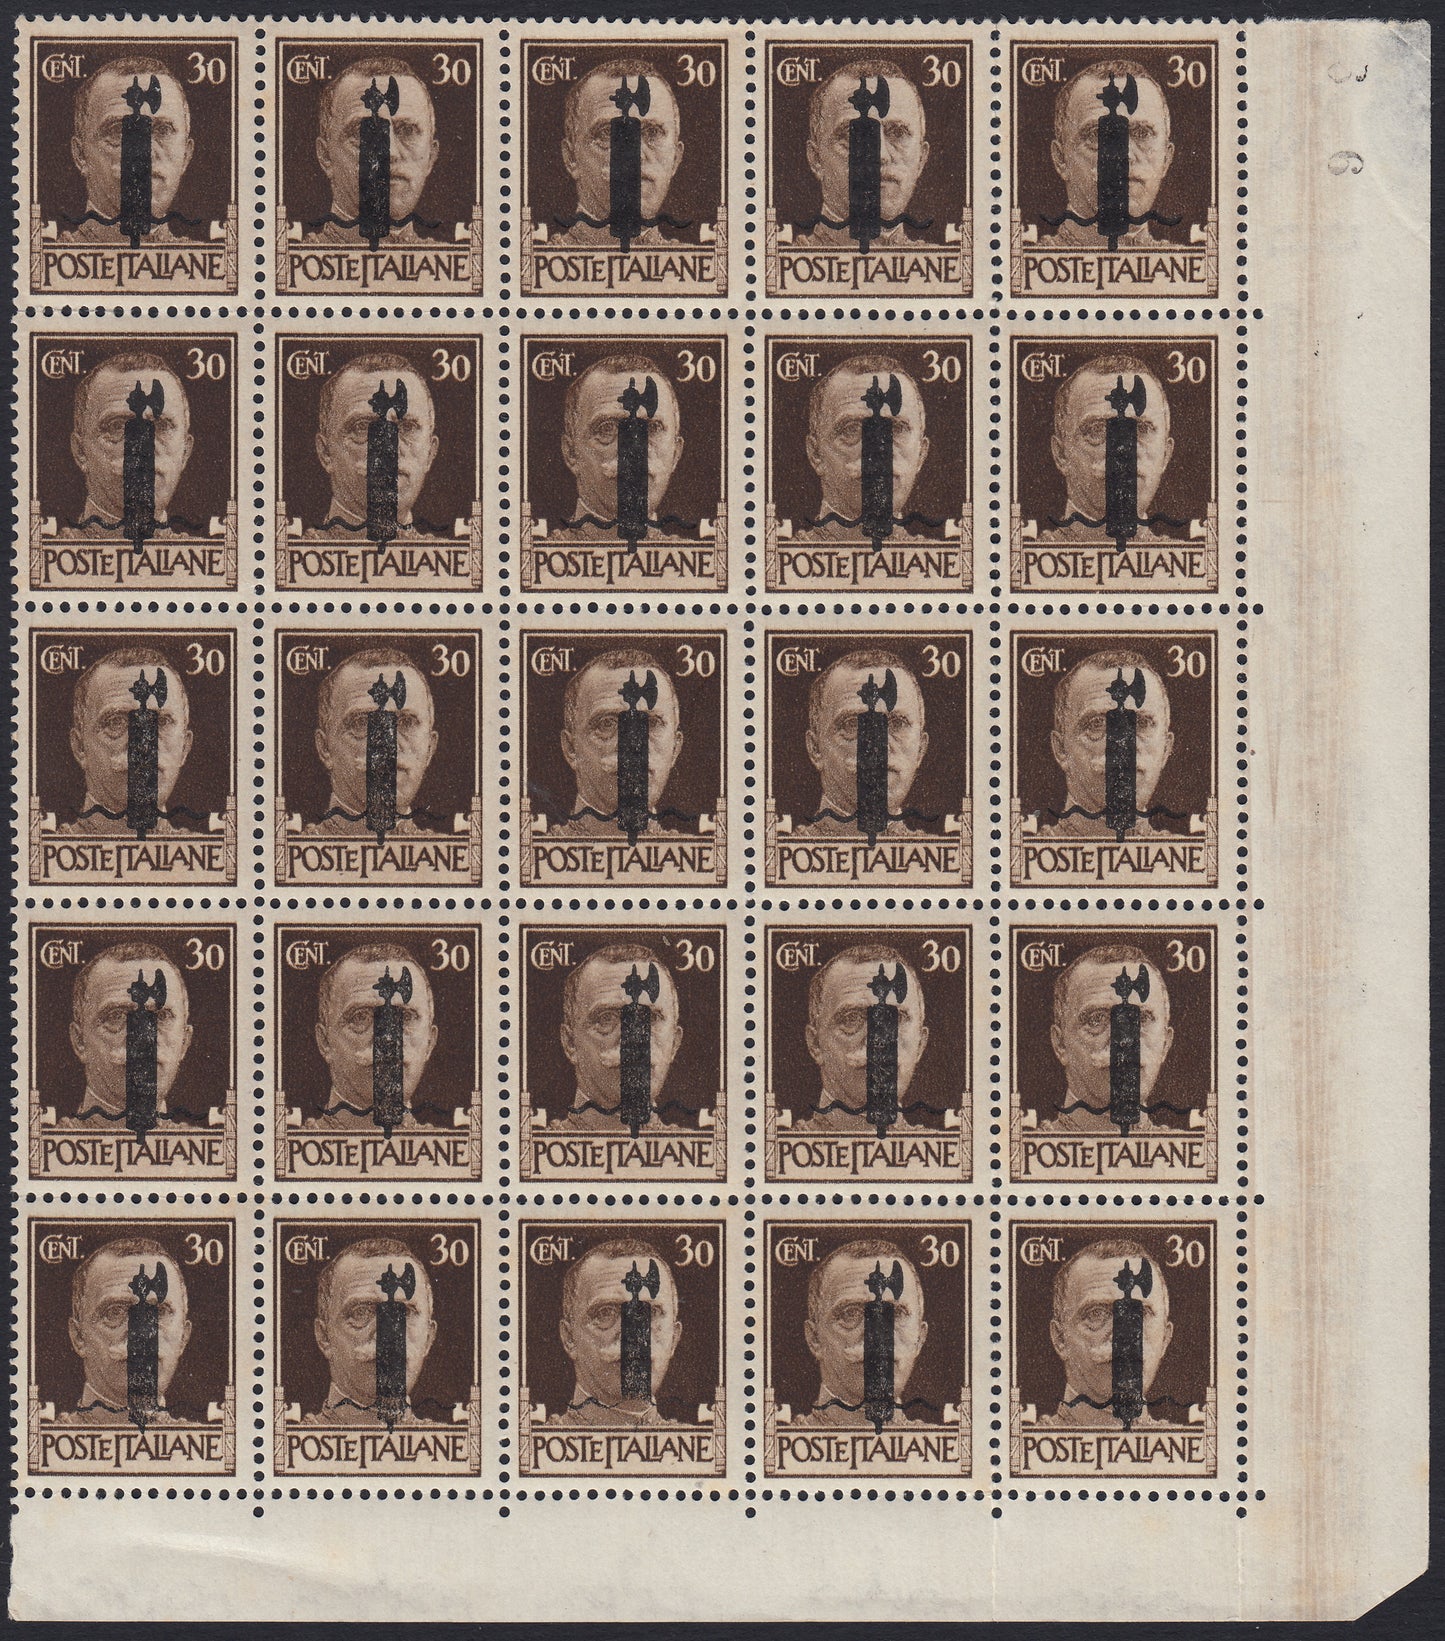 RSI555 - 1944 - Imperial of Kingdom c. 30 brown overprint type "l" in black color error of the overprint, block of 25 copies, new, intact (492A)